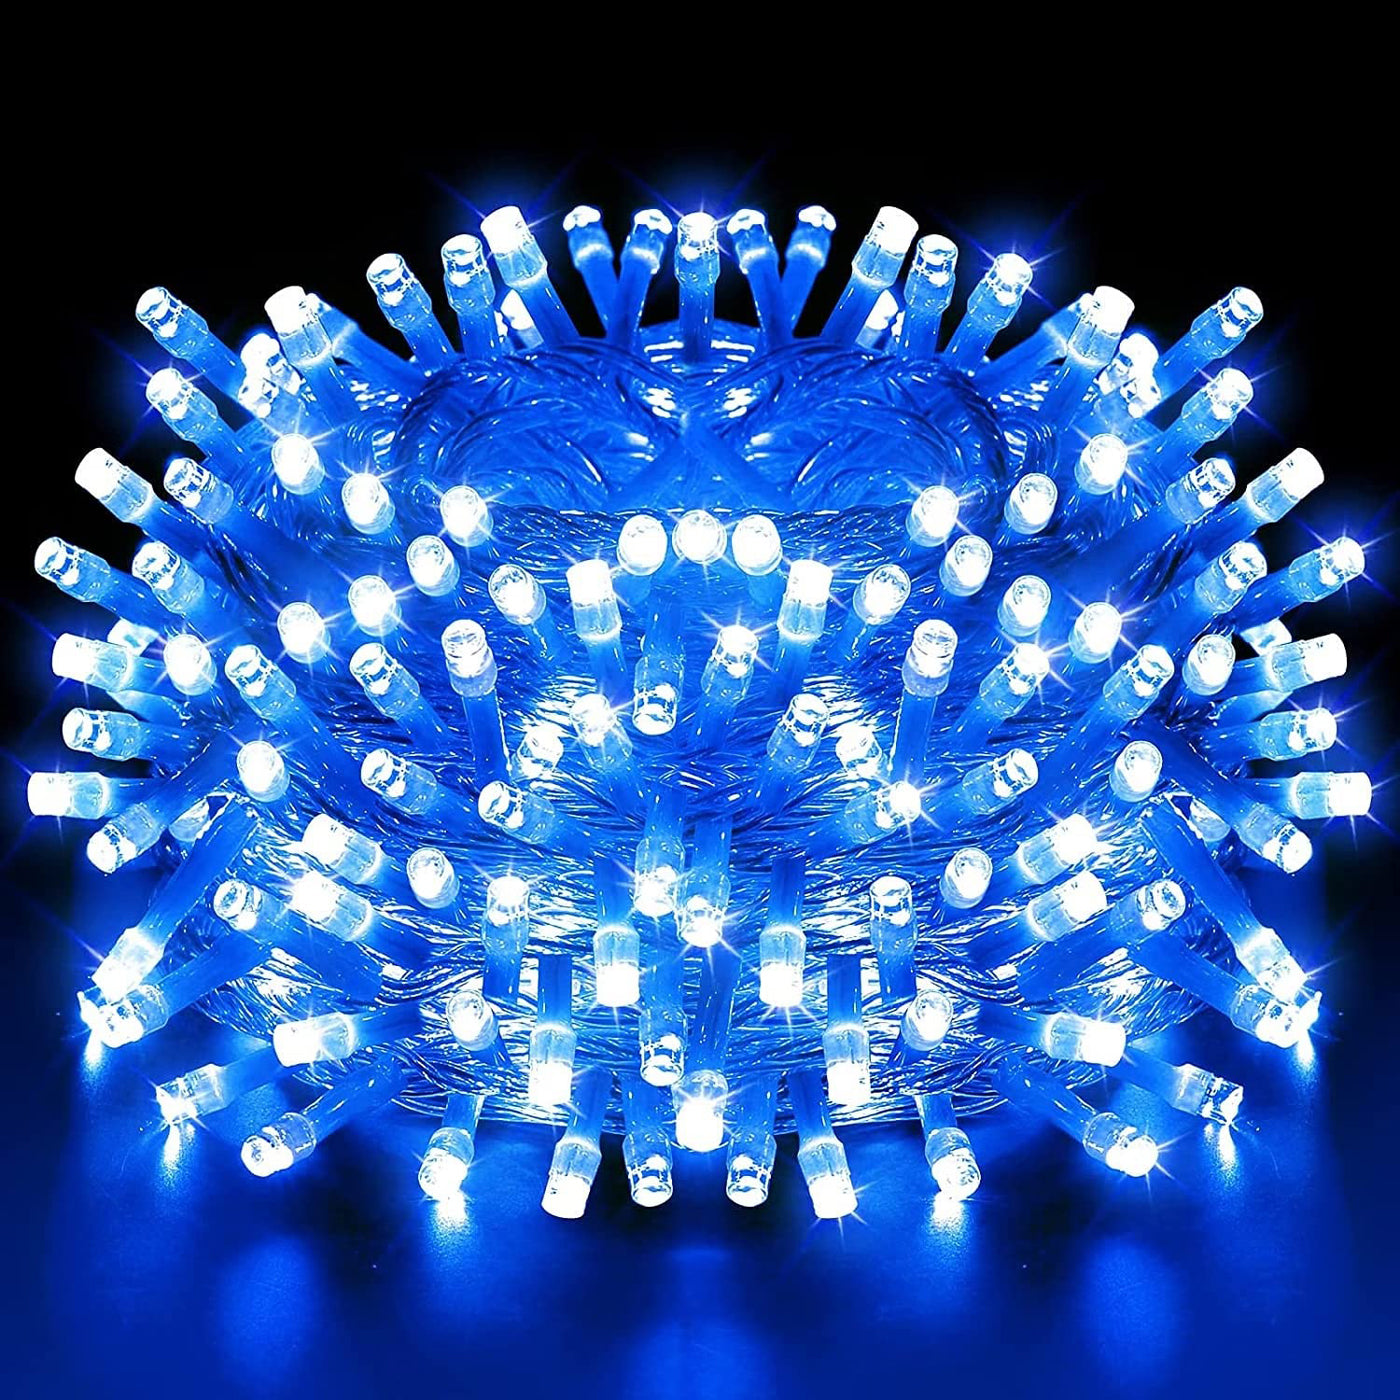 DecorTwist LED String Light for Home and Office Decor| Indoor & Outdoor Decorative Lights|Christmas |Diwali |Wedding | Christmas | Diwali | Wedding |12 Meter Length | (Blue)